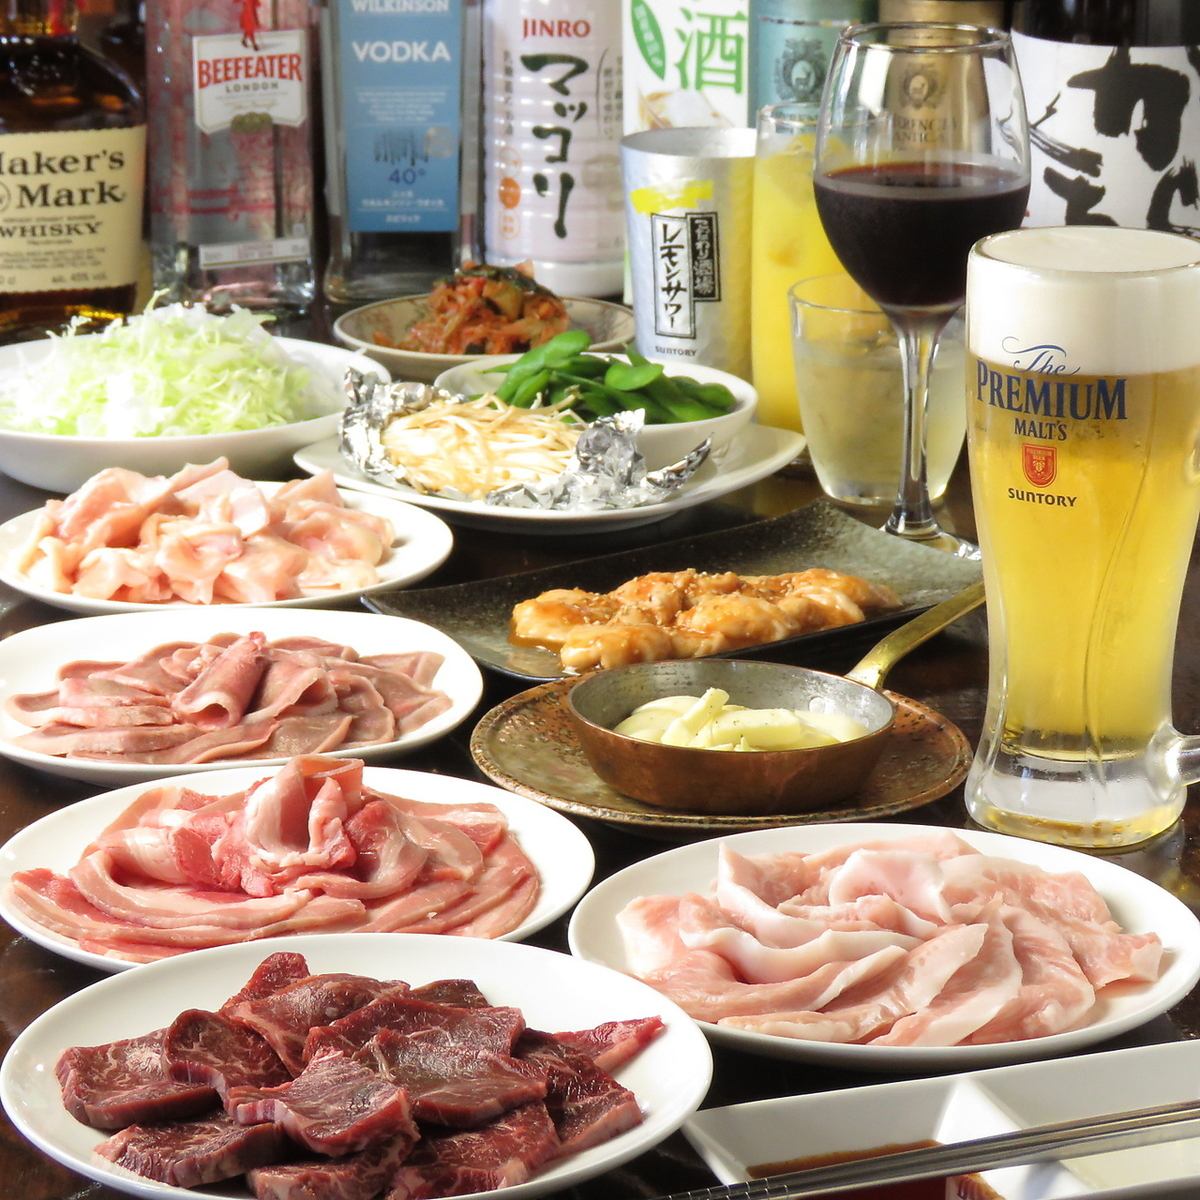 If you want to enjoy delicious meat to your heart's content, go to our shop!